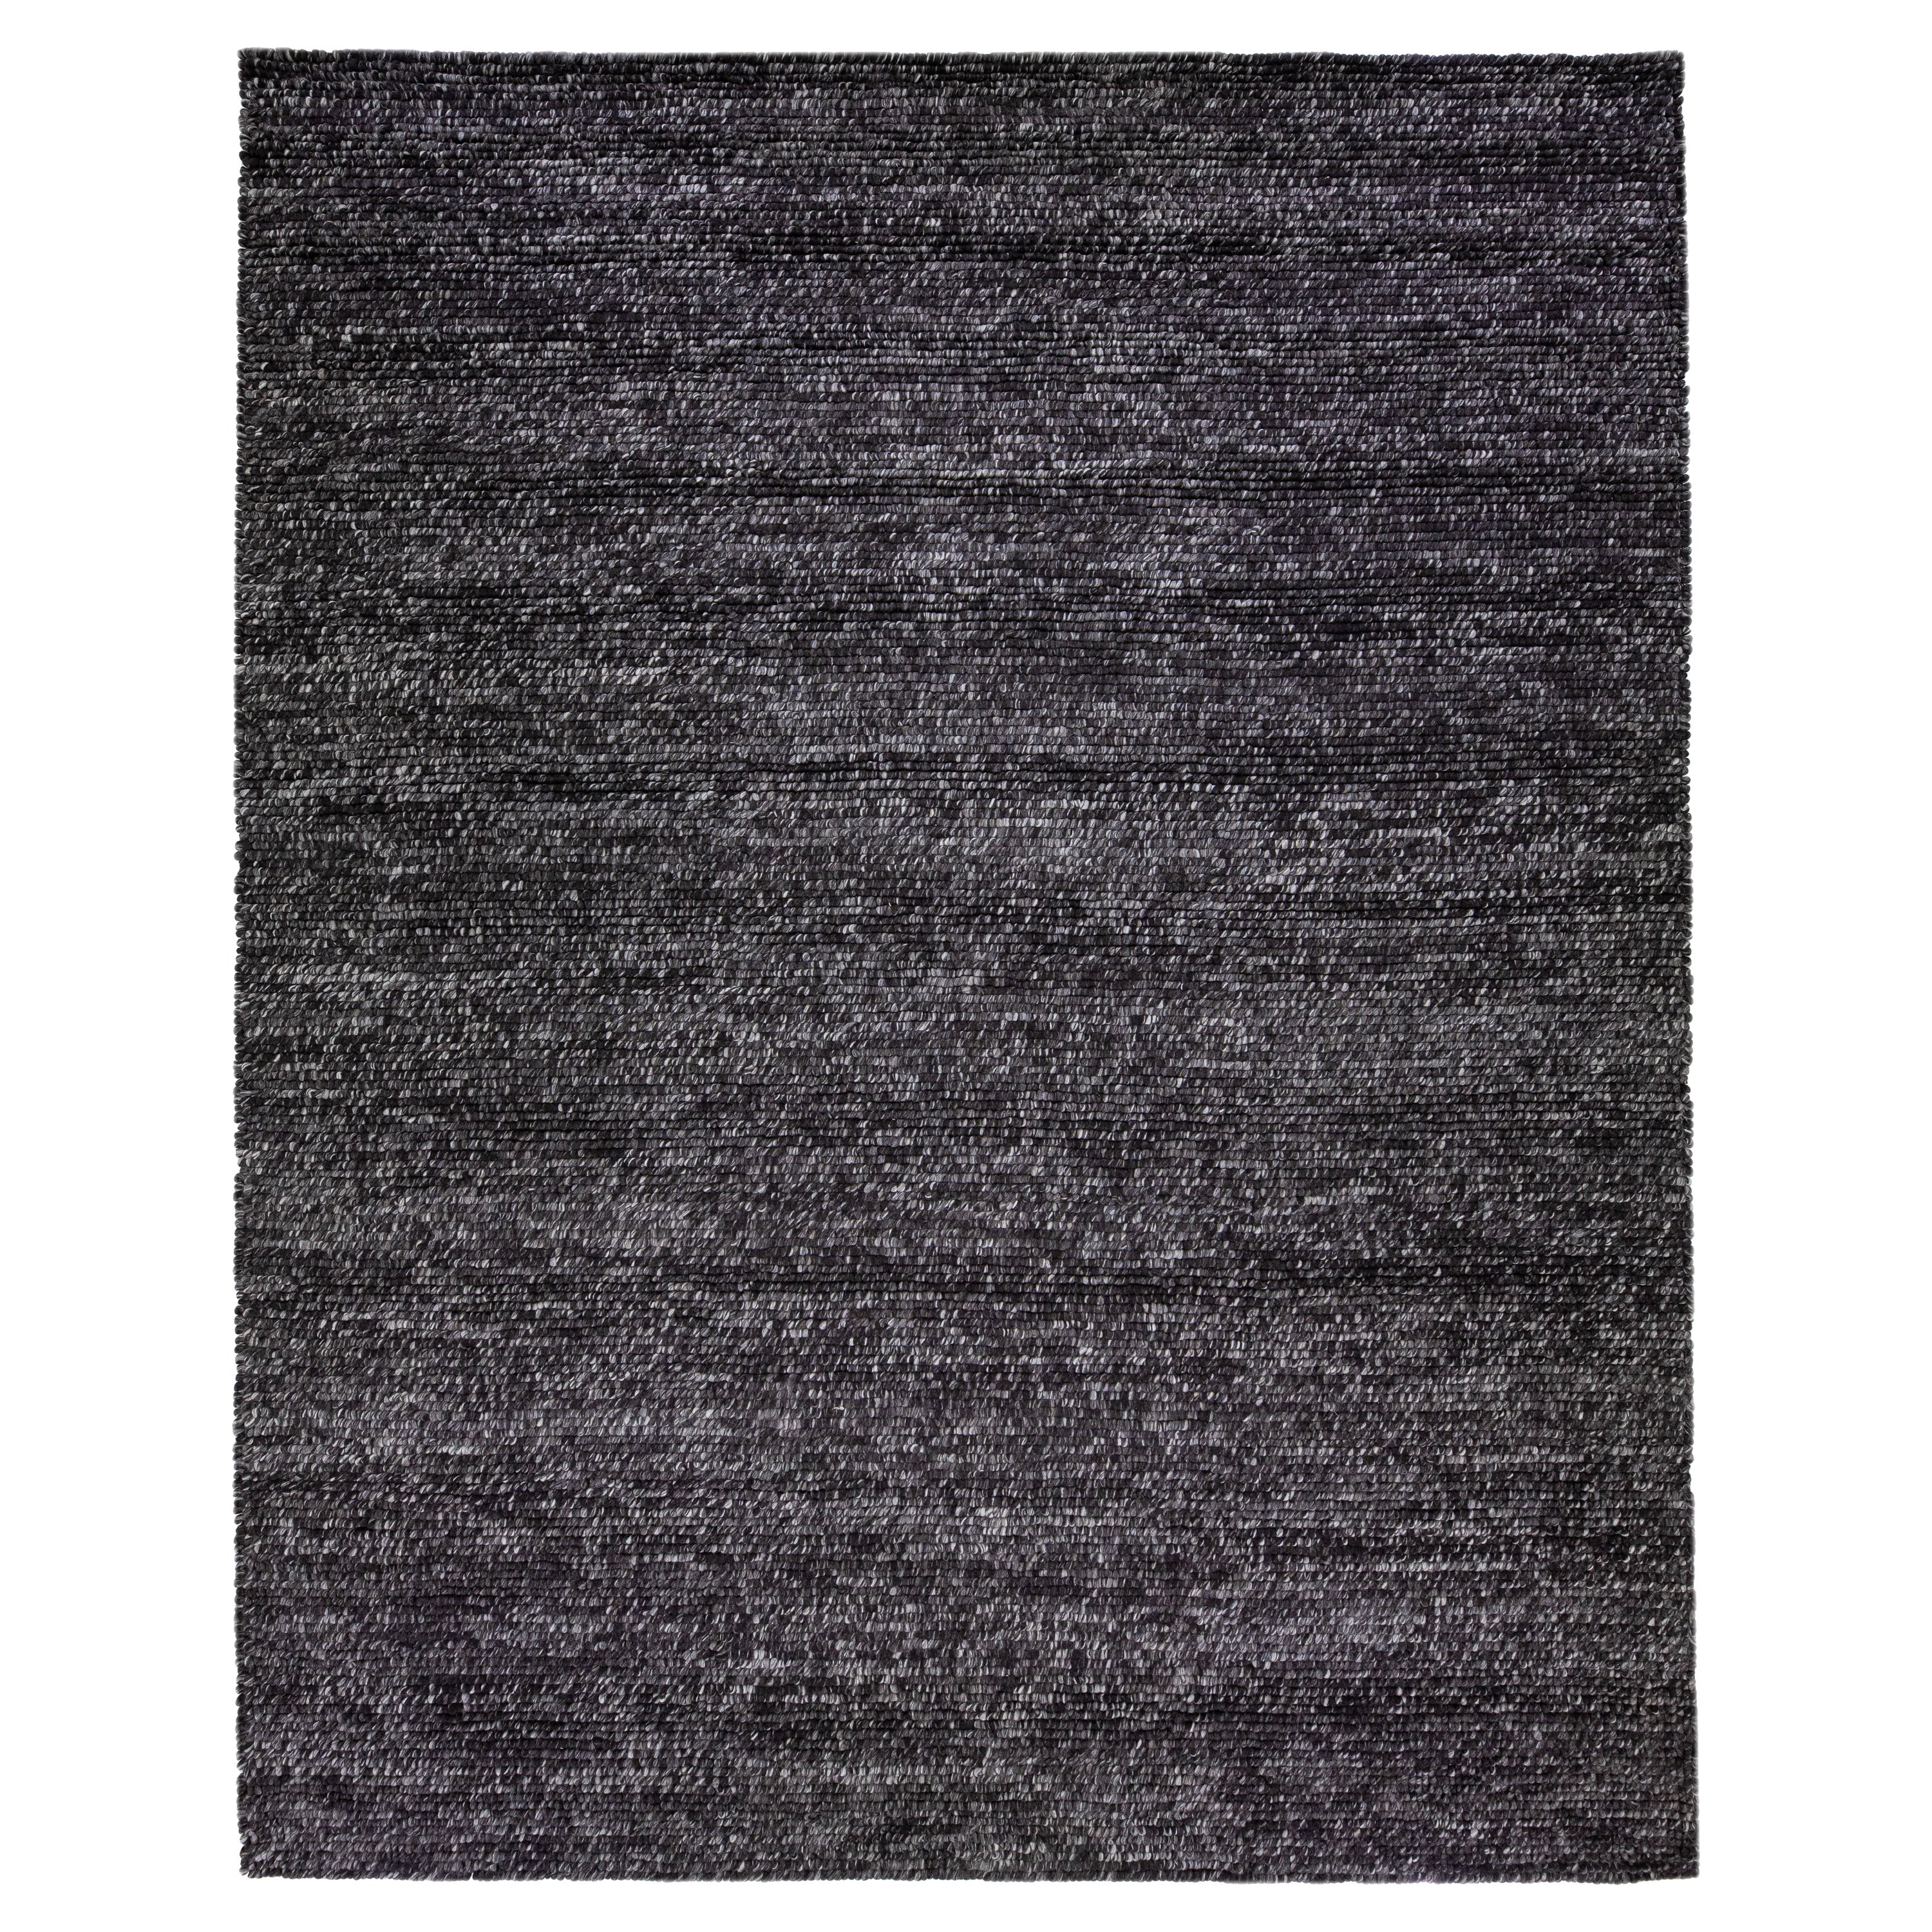 Gray-Charcoal Color Modern Felted Textuted Wool Rug by Apadana